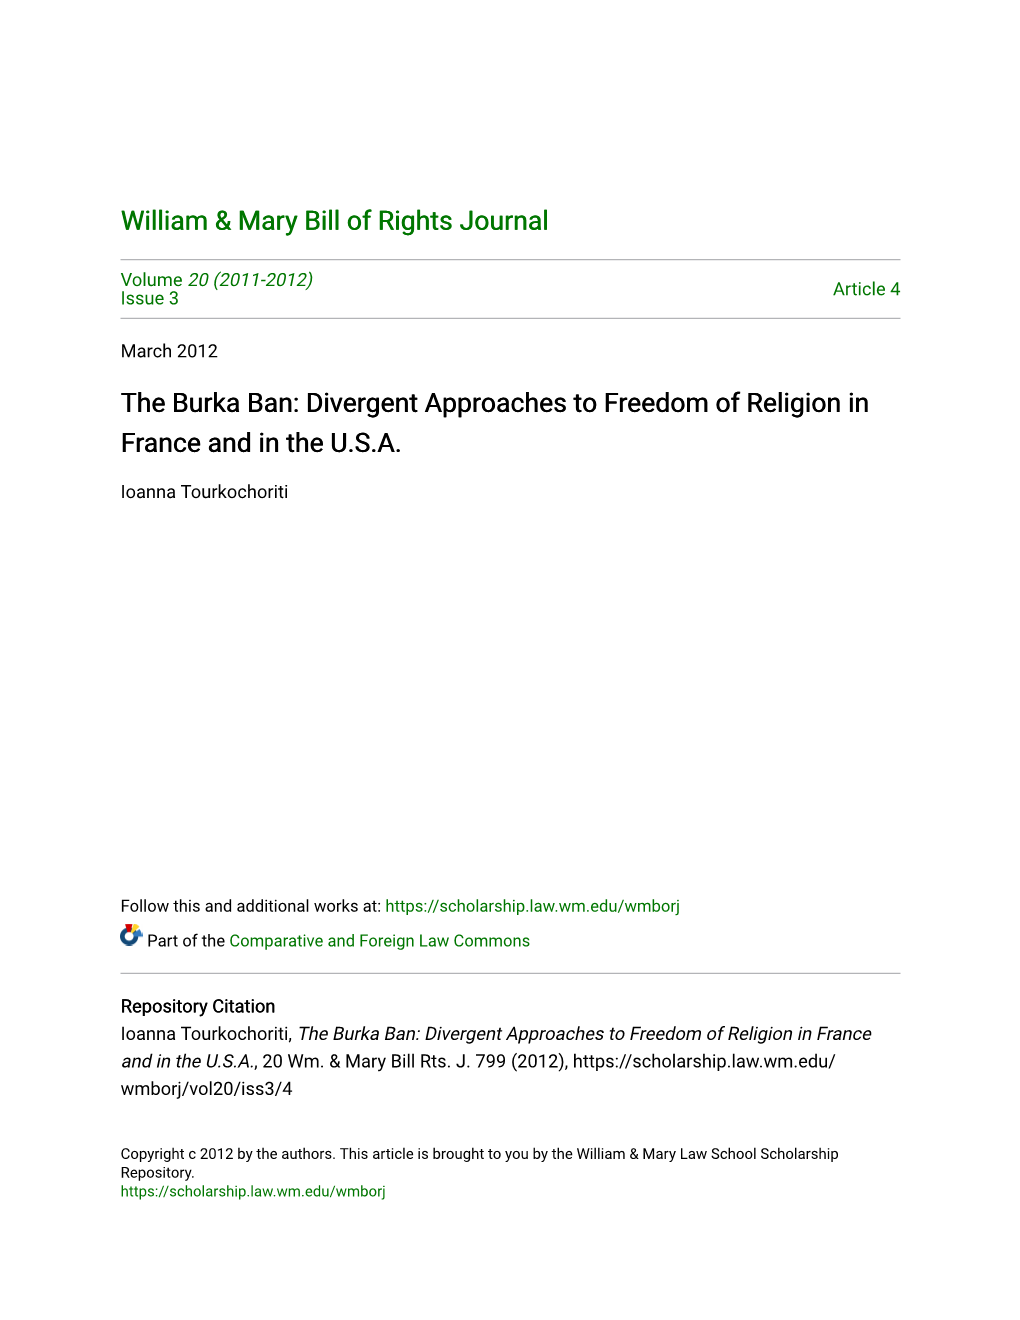 The Burka Ban: Divergent Approaches to Freedom of Religion in France and in the U.S.A